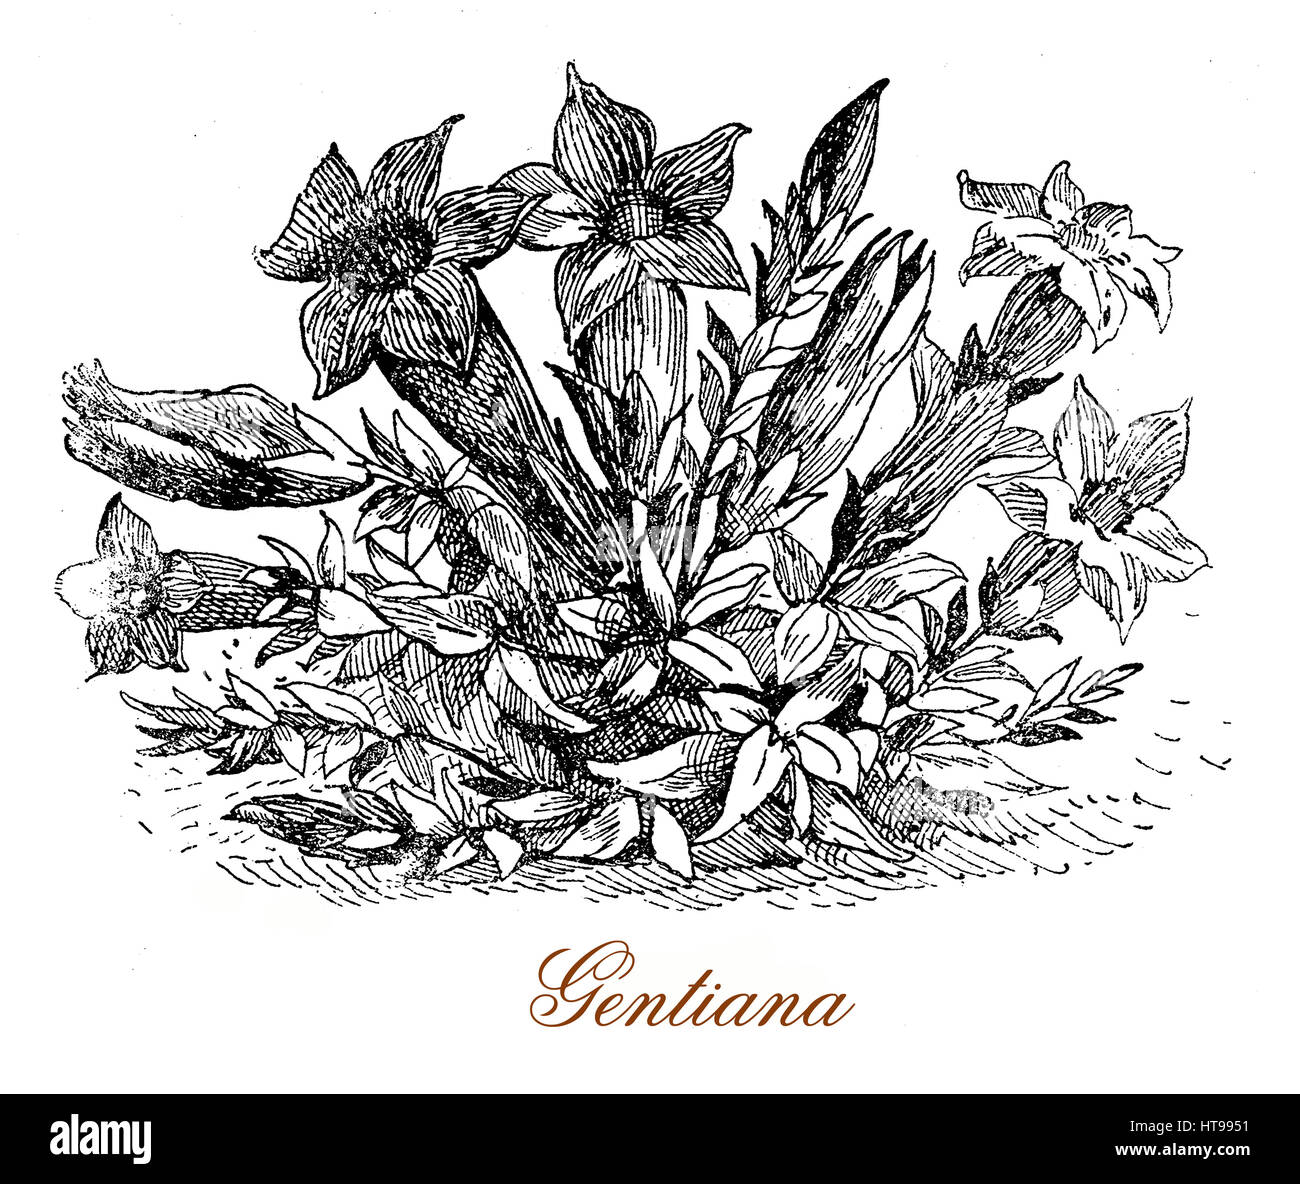 Vintage engraving of Gentiana, alpine flowering plant with intense blue flowers, used in herbal medicine and in digestive liqueurs Stock Photo